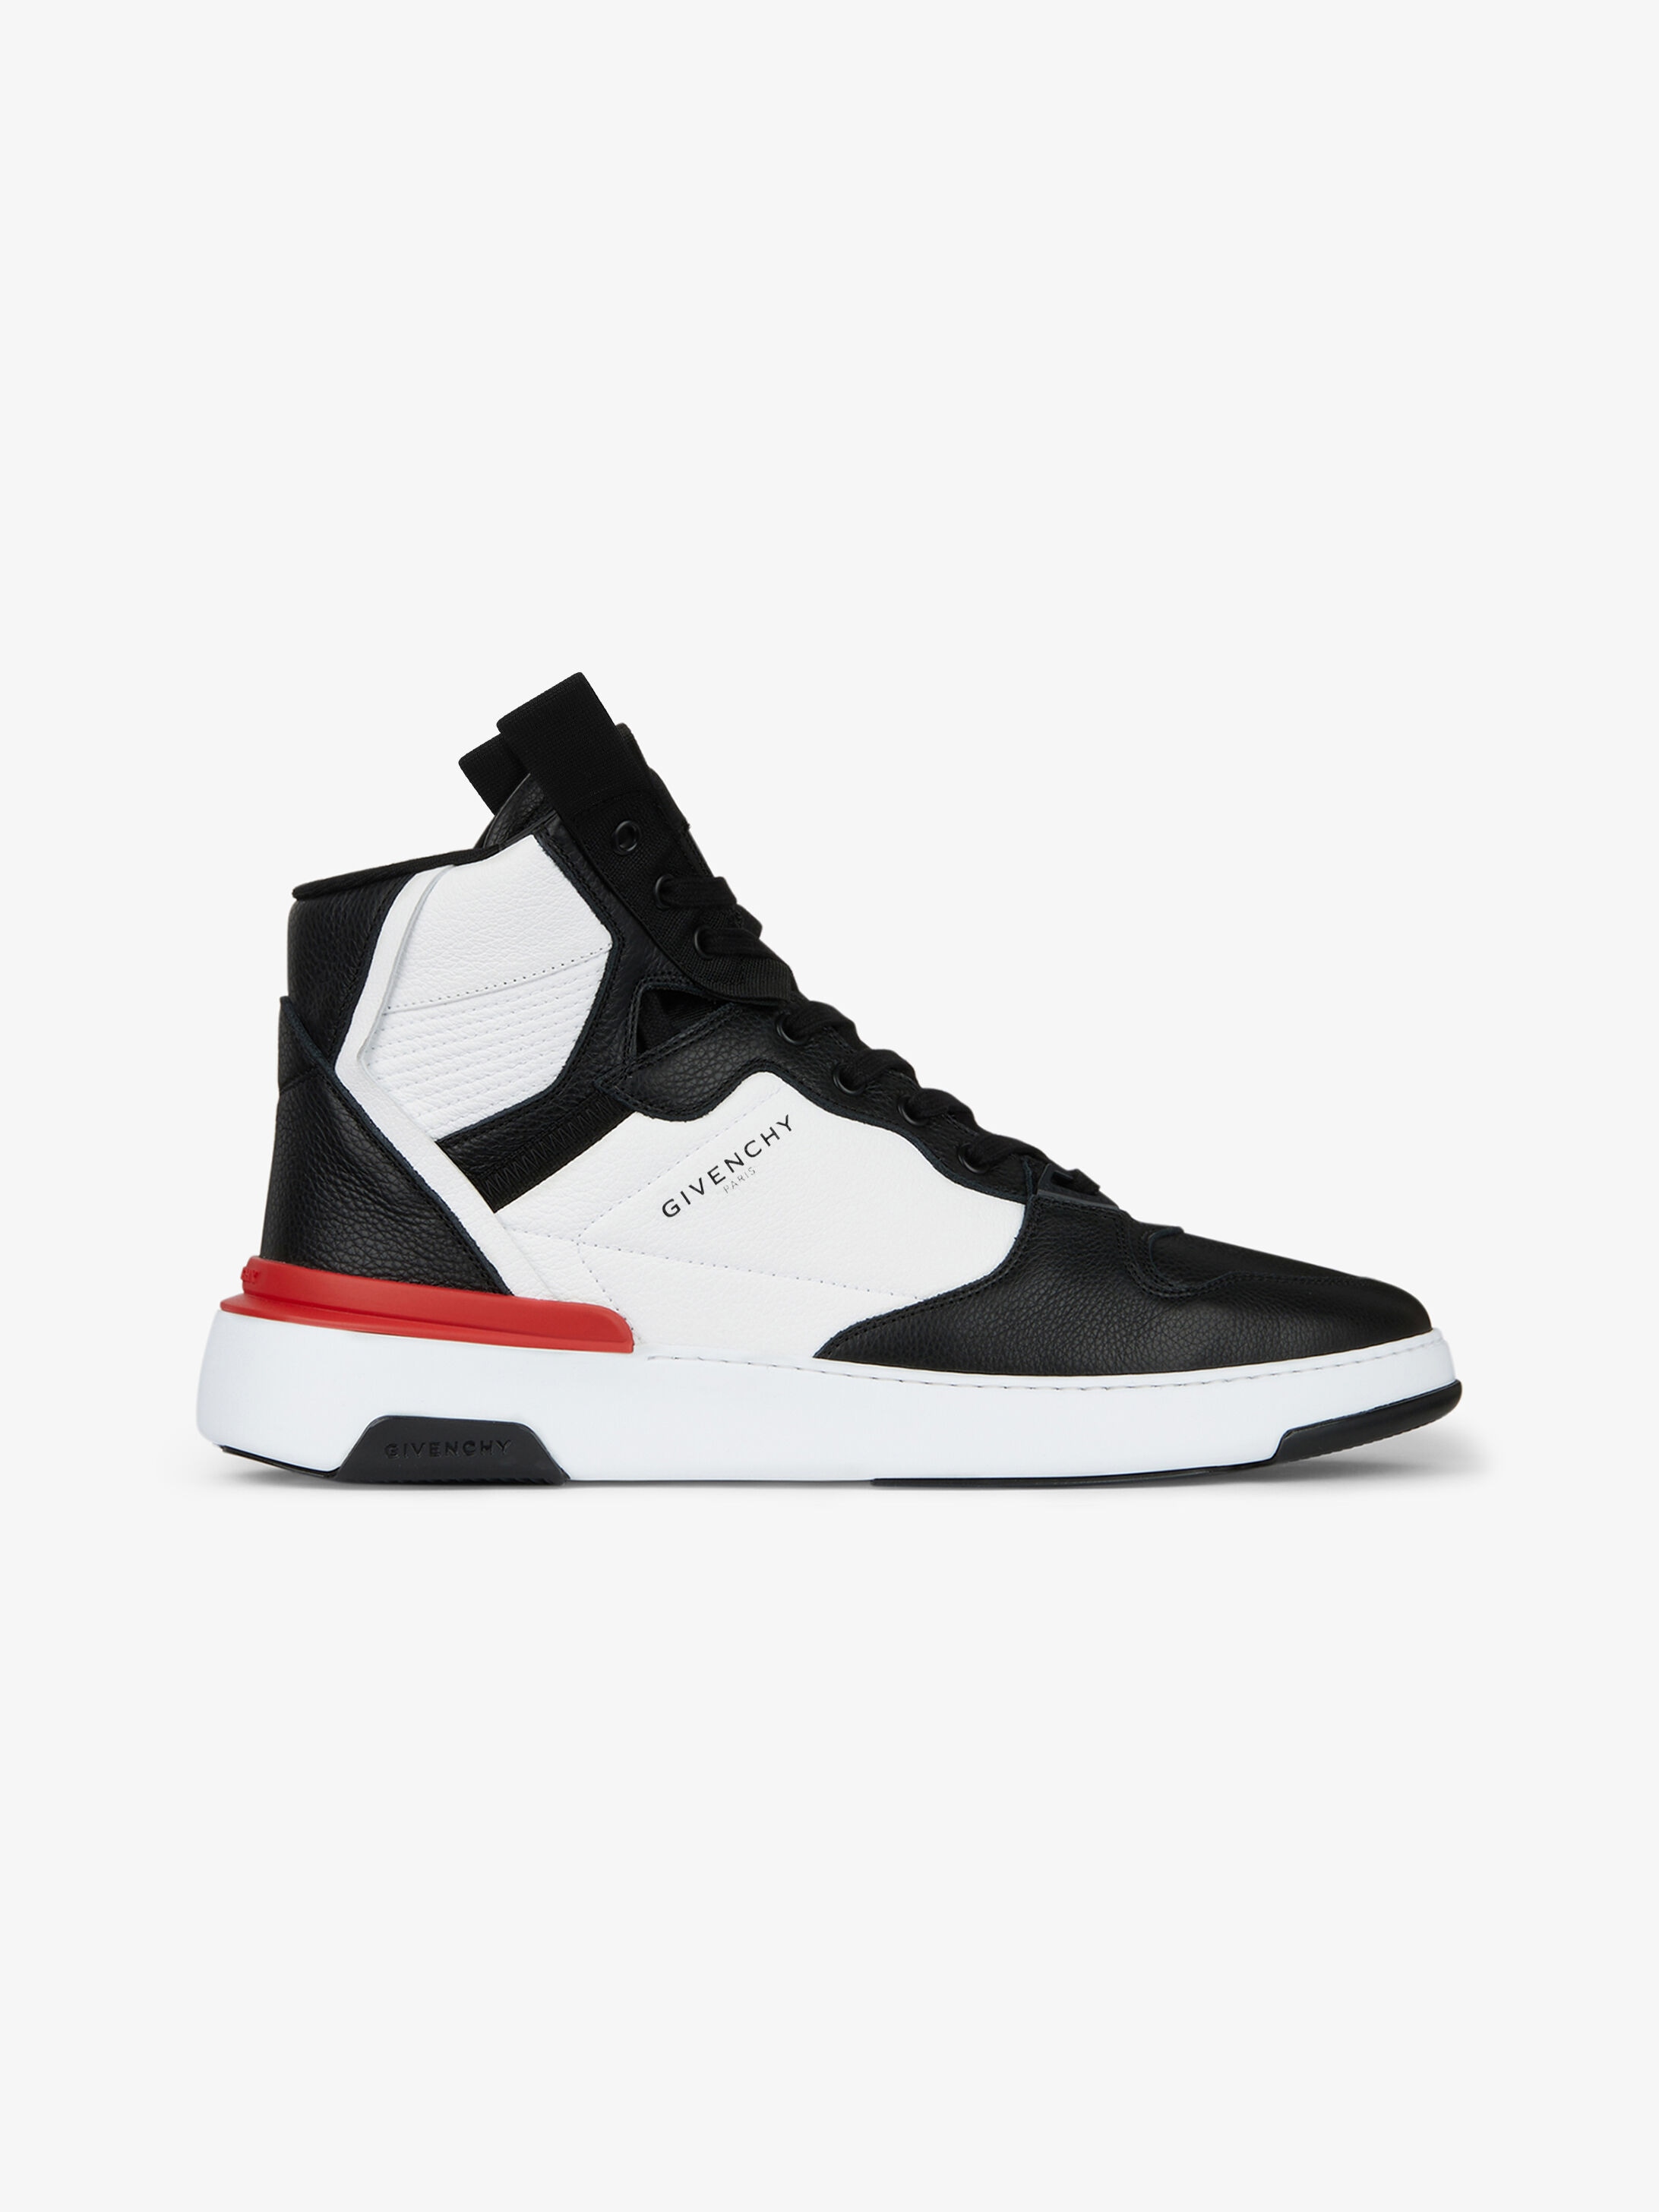 givenchy sneakers 2019